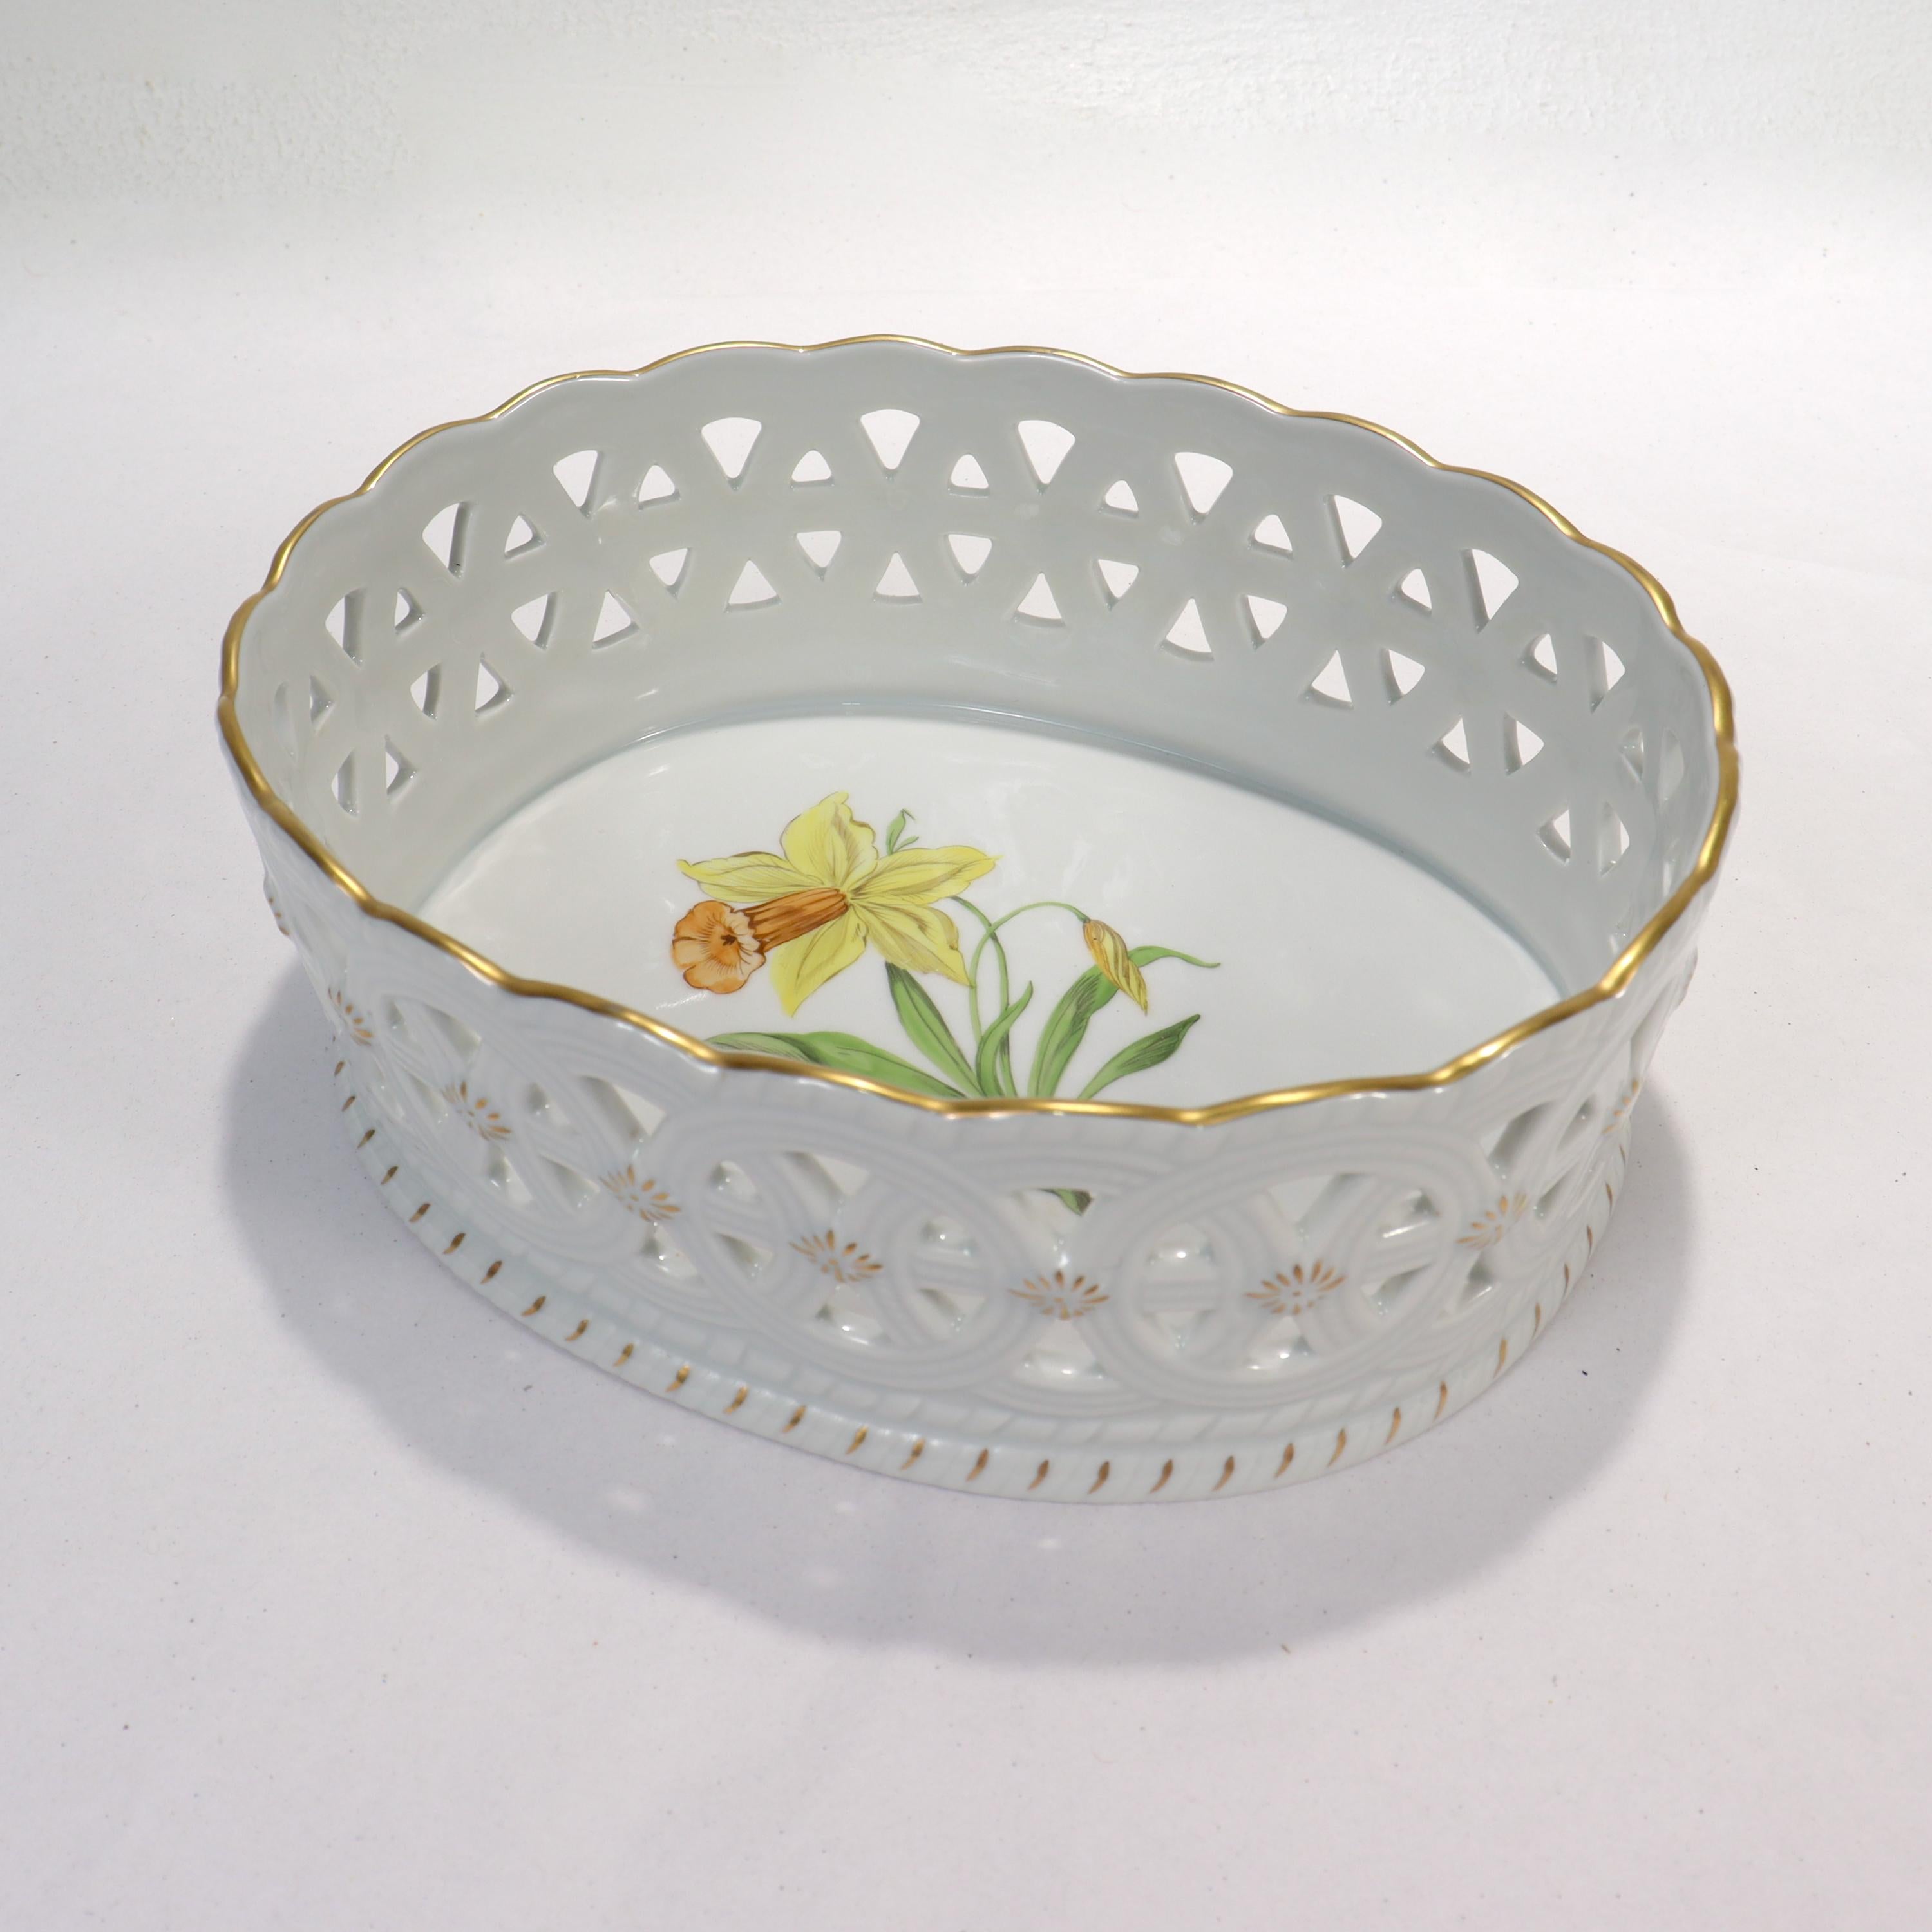 A fine German porcelain openwork or reticulated basket.

By the Ludwigsburg Porcelain Manufactory. 

With pierced sides of interlocking circular devices above a gadrooned and ropetwist base.

Having a handpainted yellow daffodil to the center